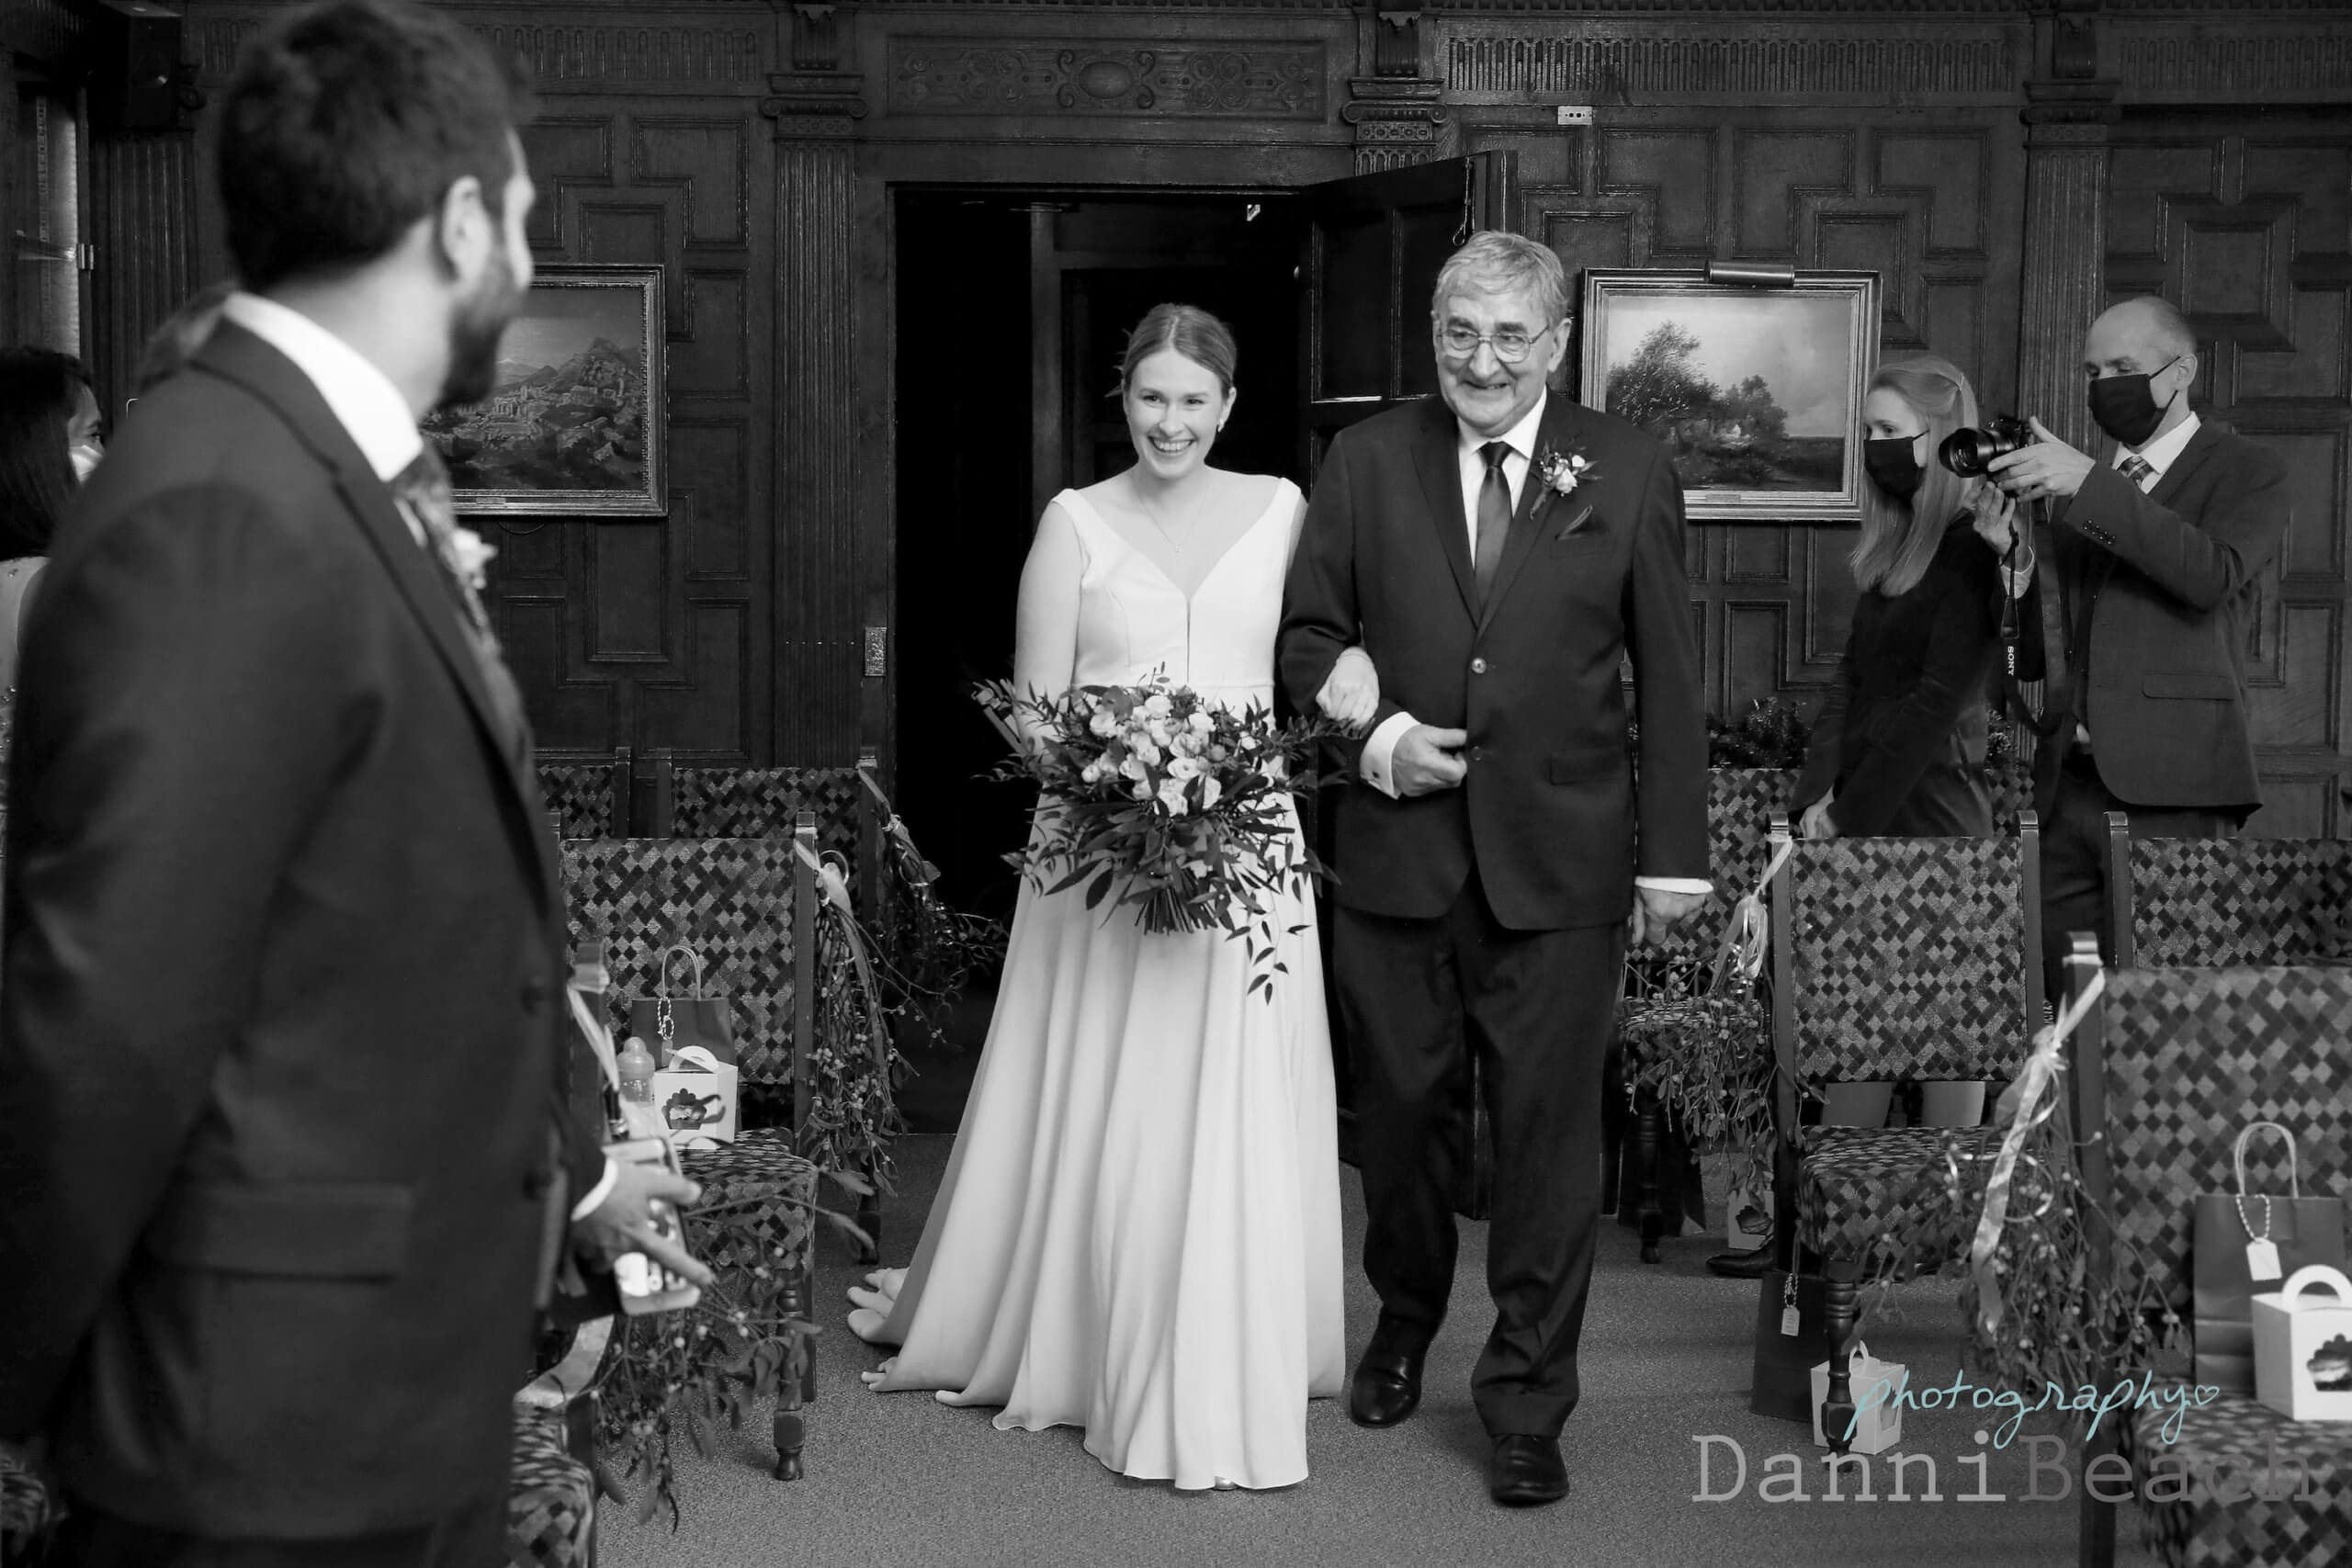 Brides entrance with Father of the bride